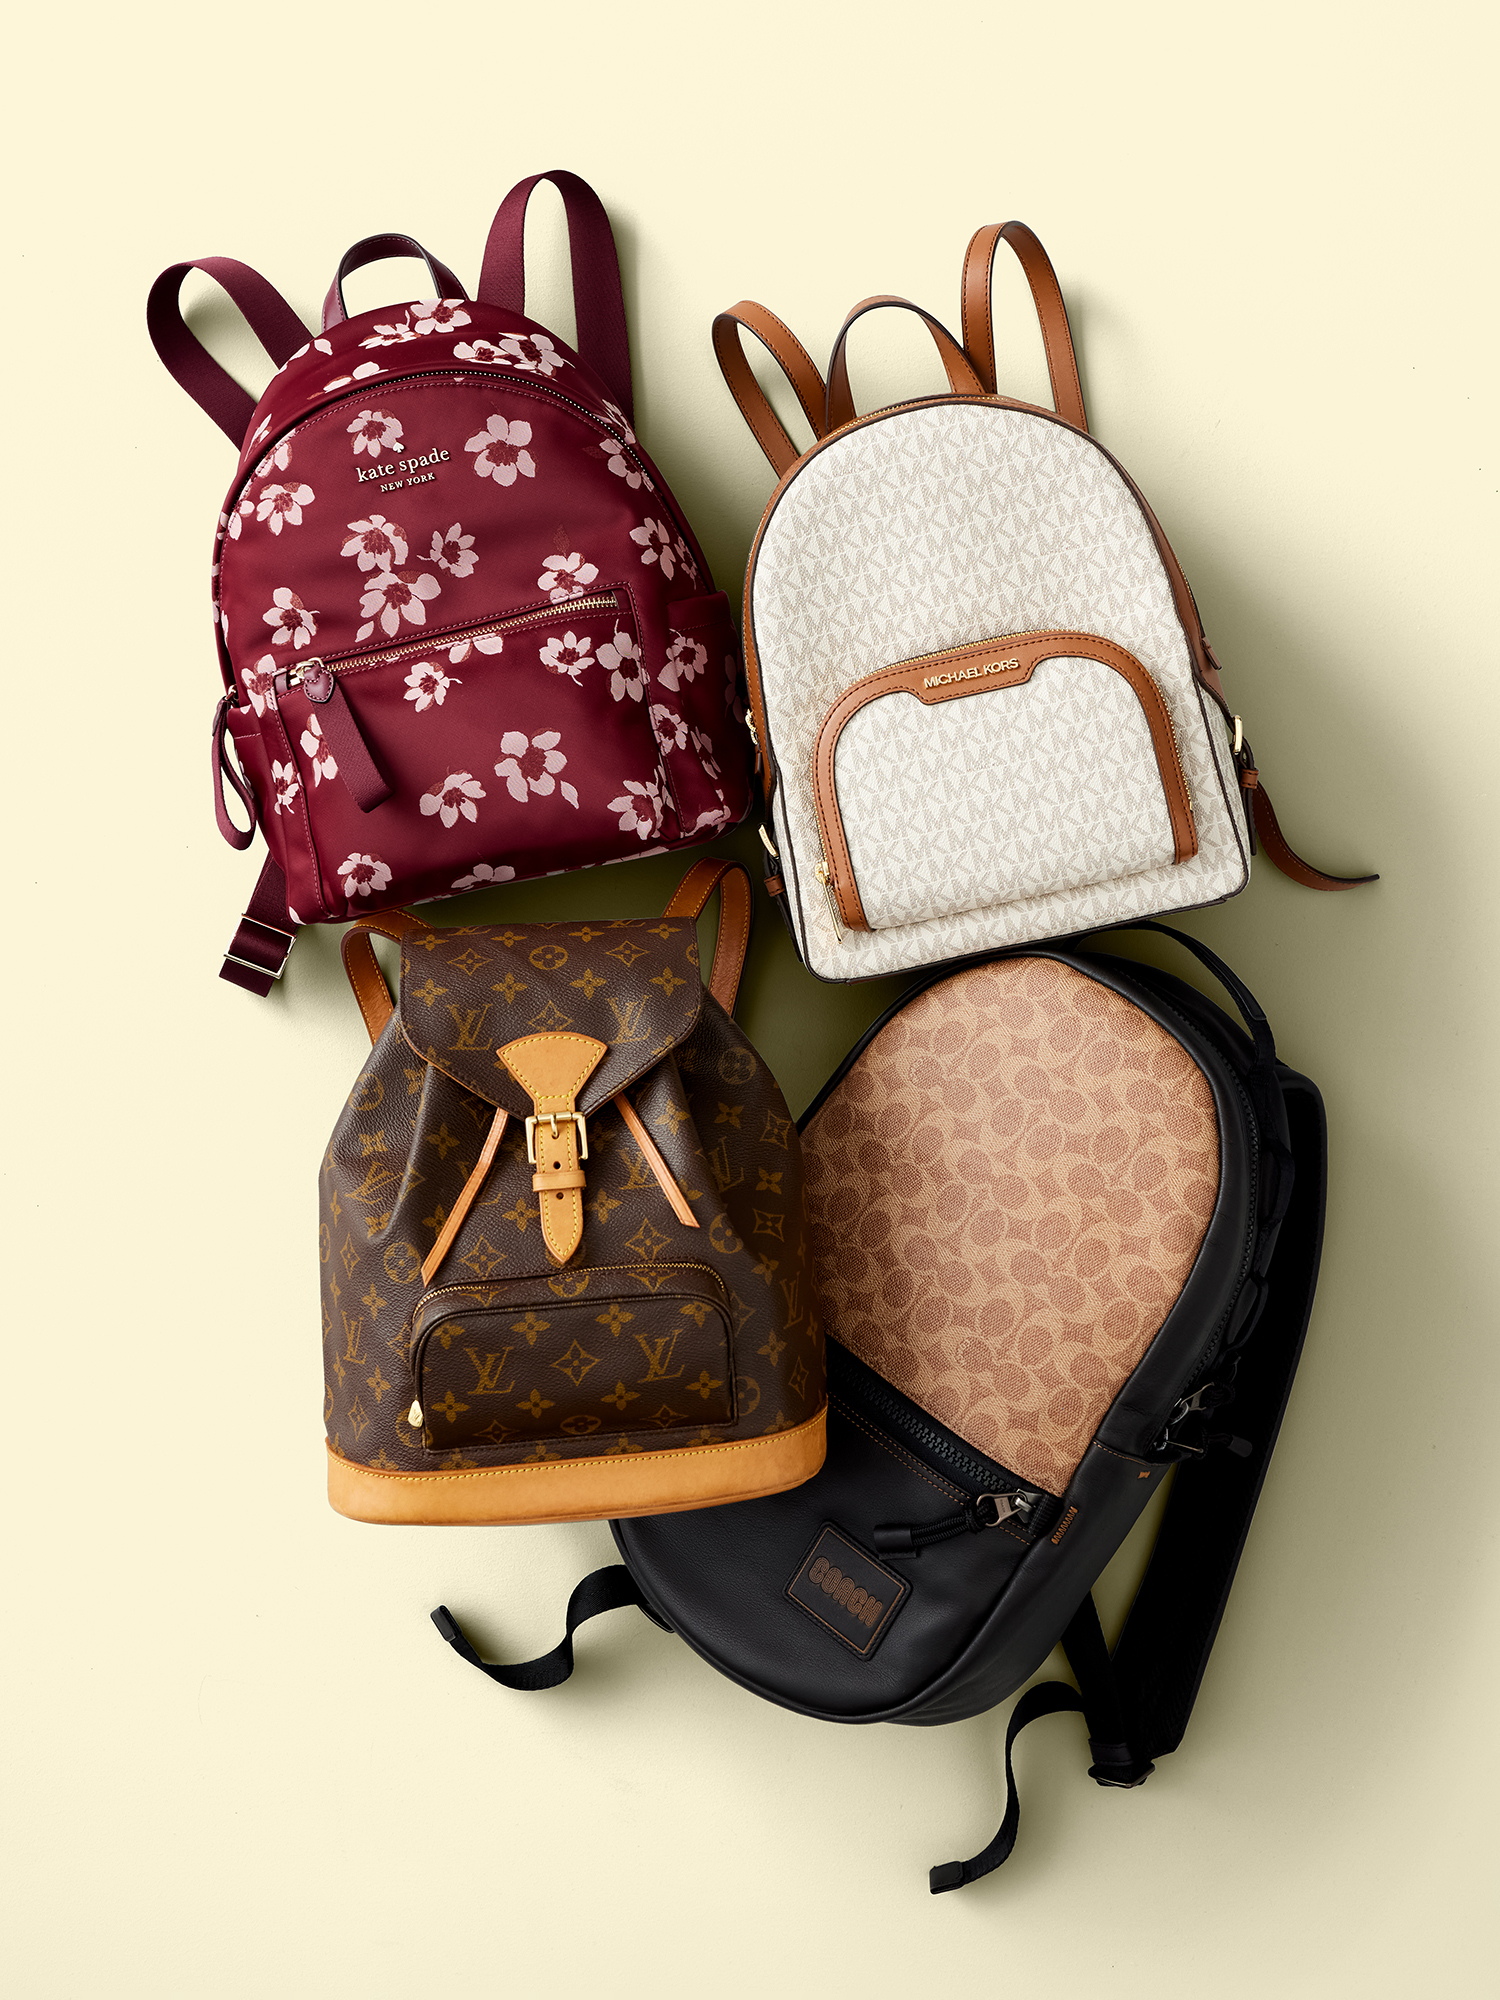 Coach Signature Canvas With Coach Patch Pacer Backpack - image 2 of 2